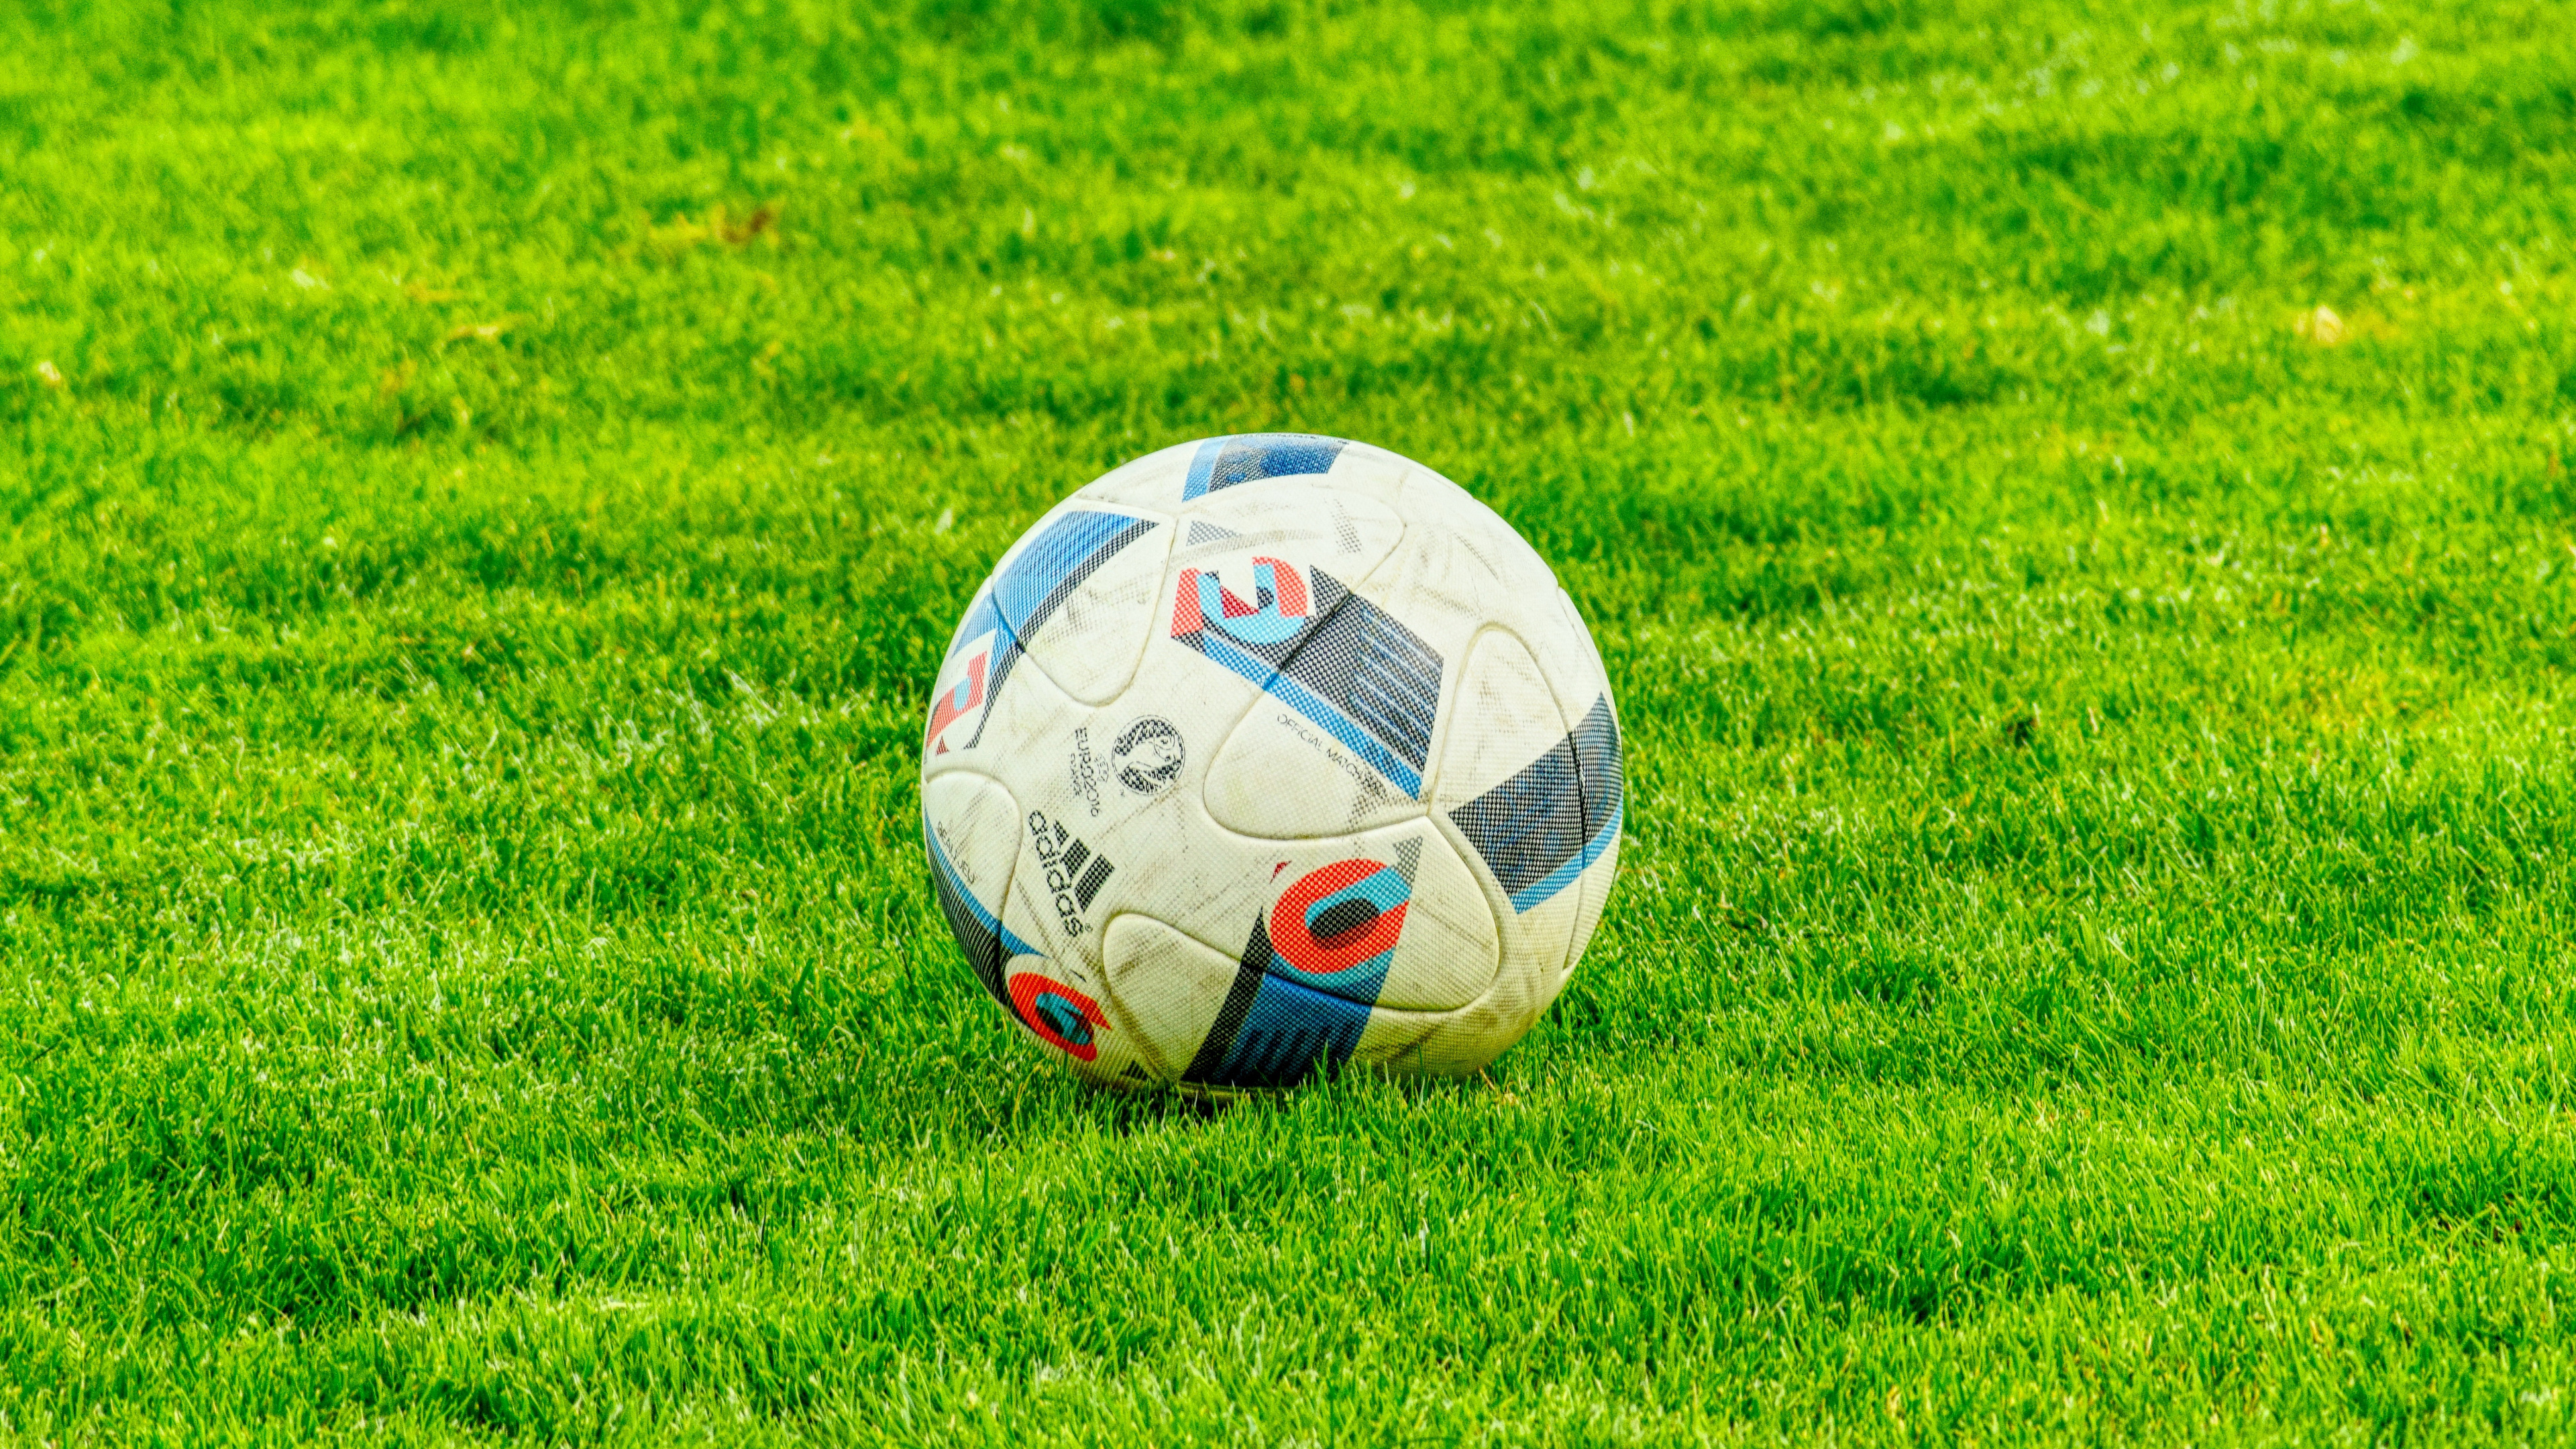 White Soccer Ball on Green Grass Field During Daytime. Wallpaper in 3840x2160 Resolution